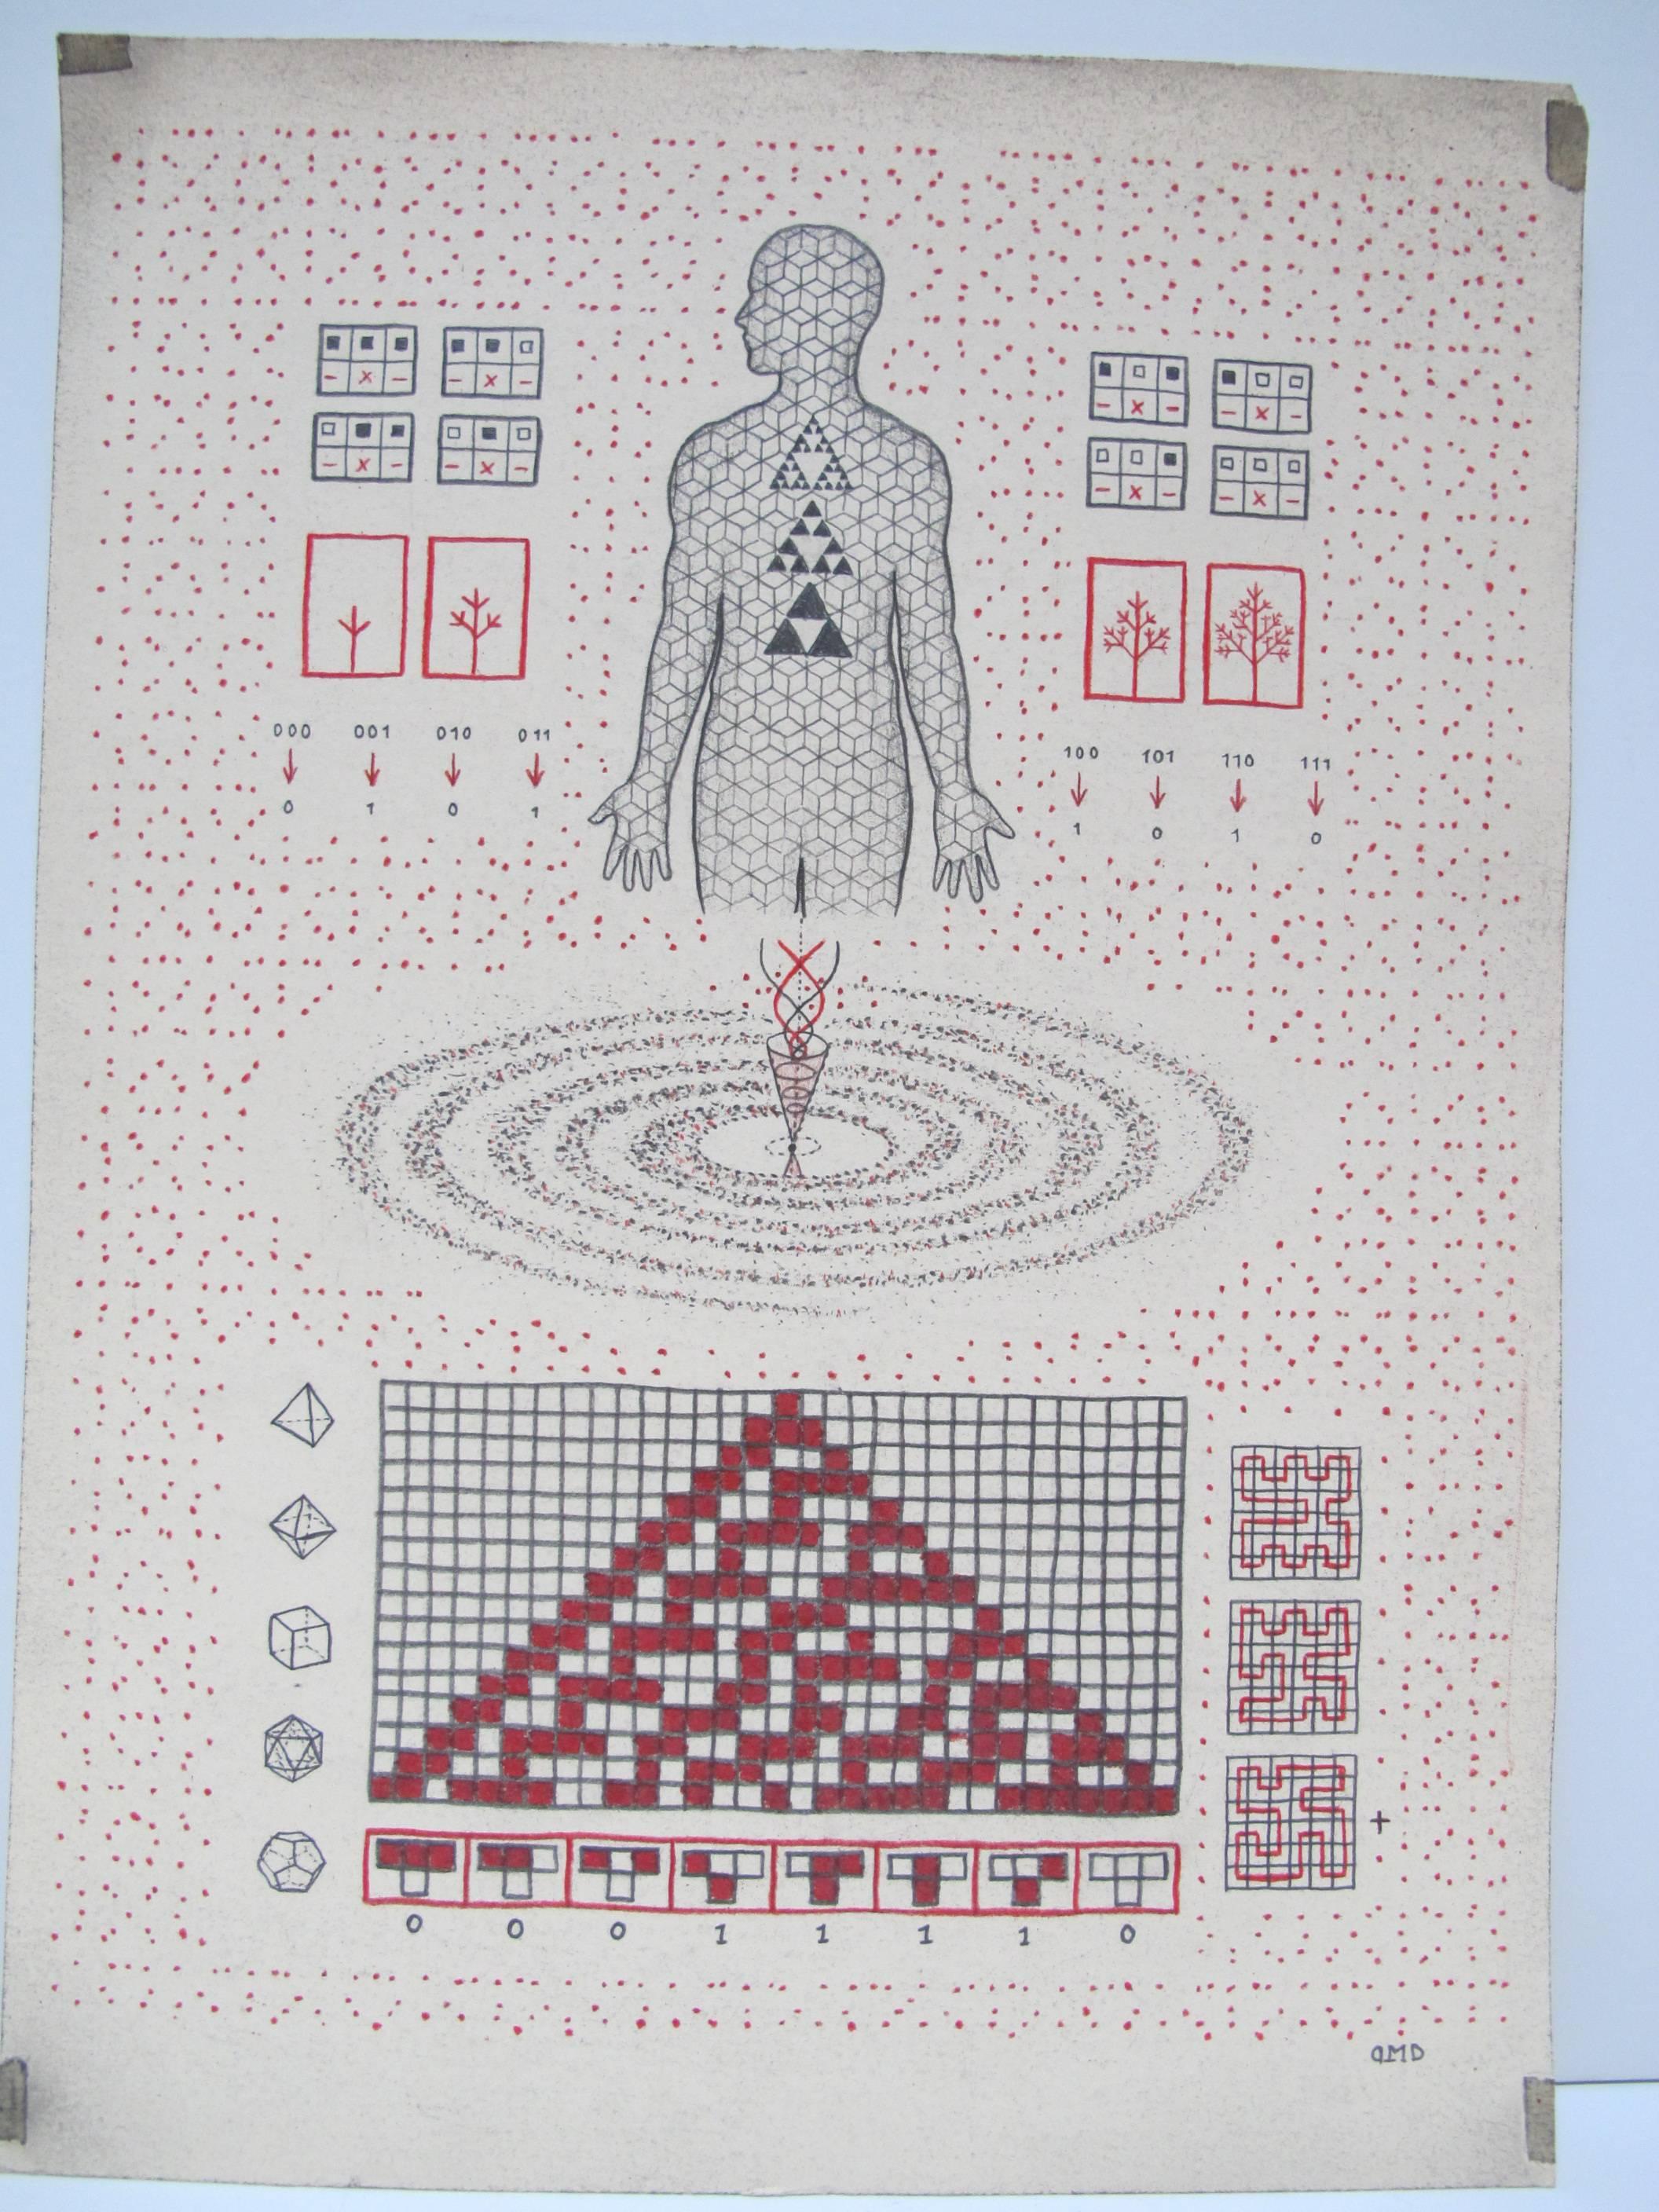 Outsider Art Cellular Automation Drawing by Daniel Martin Diaz For Sale